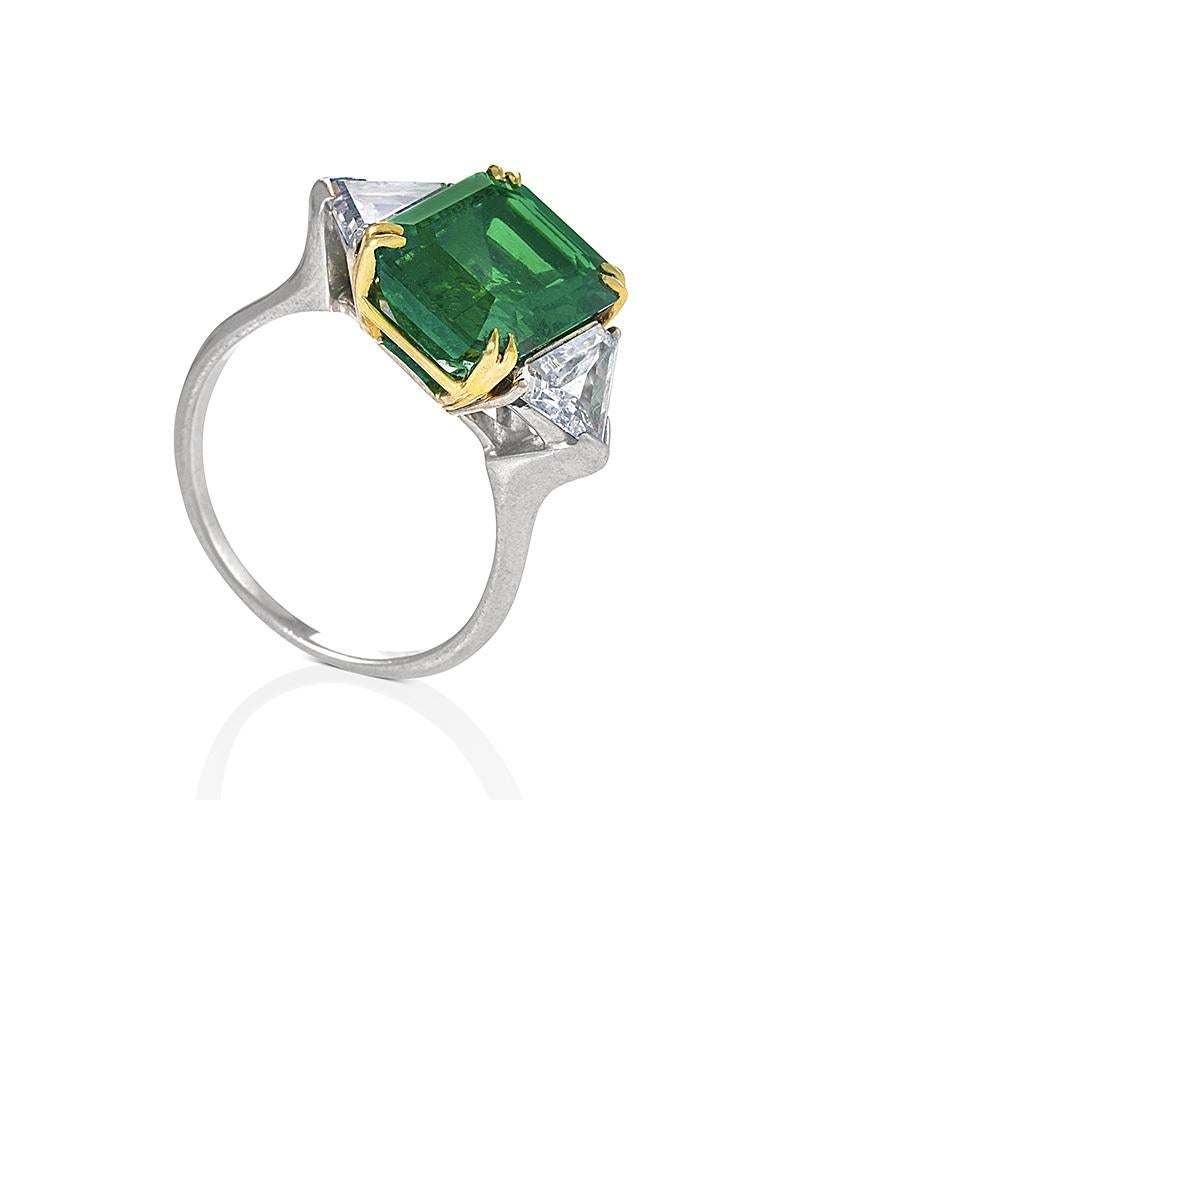 A platinum, 18 karat gold, emerald and diamond ring.  The ring centers on an emerald-cut Colombian emerald weighing 5.56 carats, flanked by 2 triangular-cut diamonds with an approximate total weight of 1.70 carats. Accompanied by  American